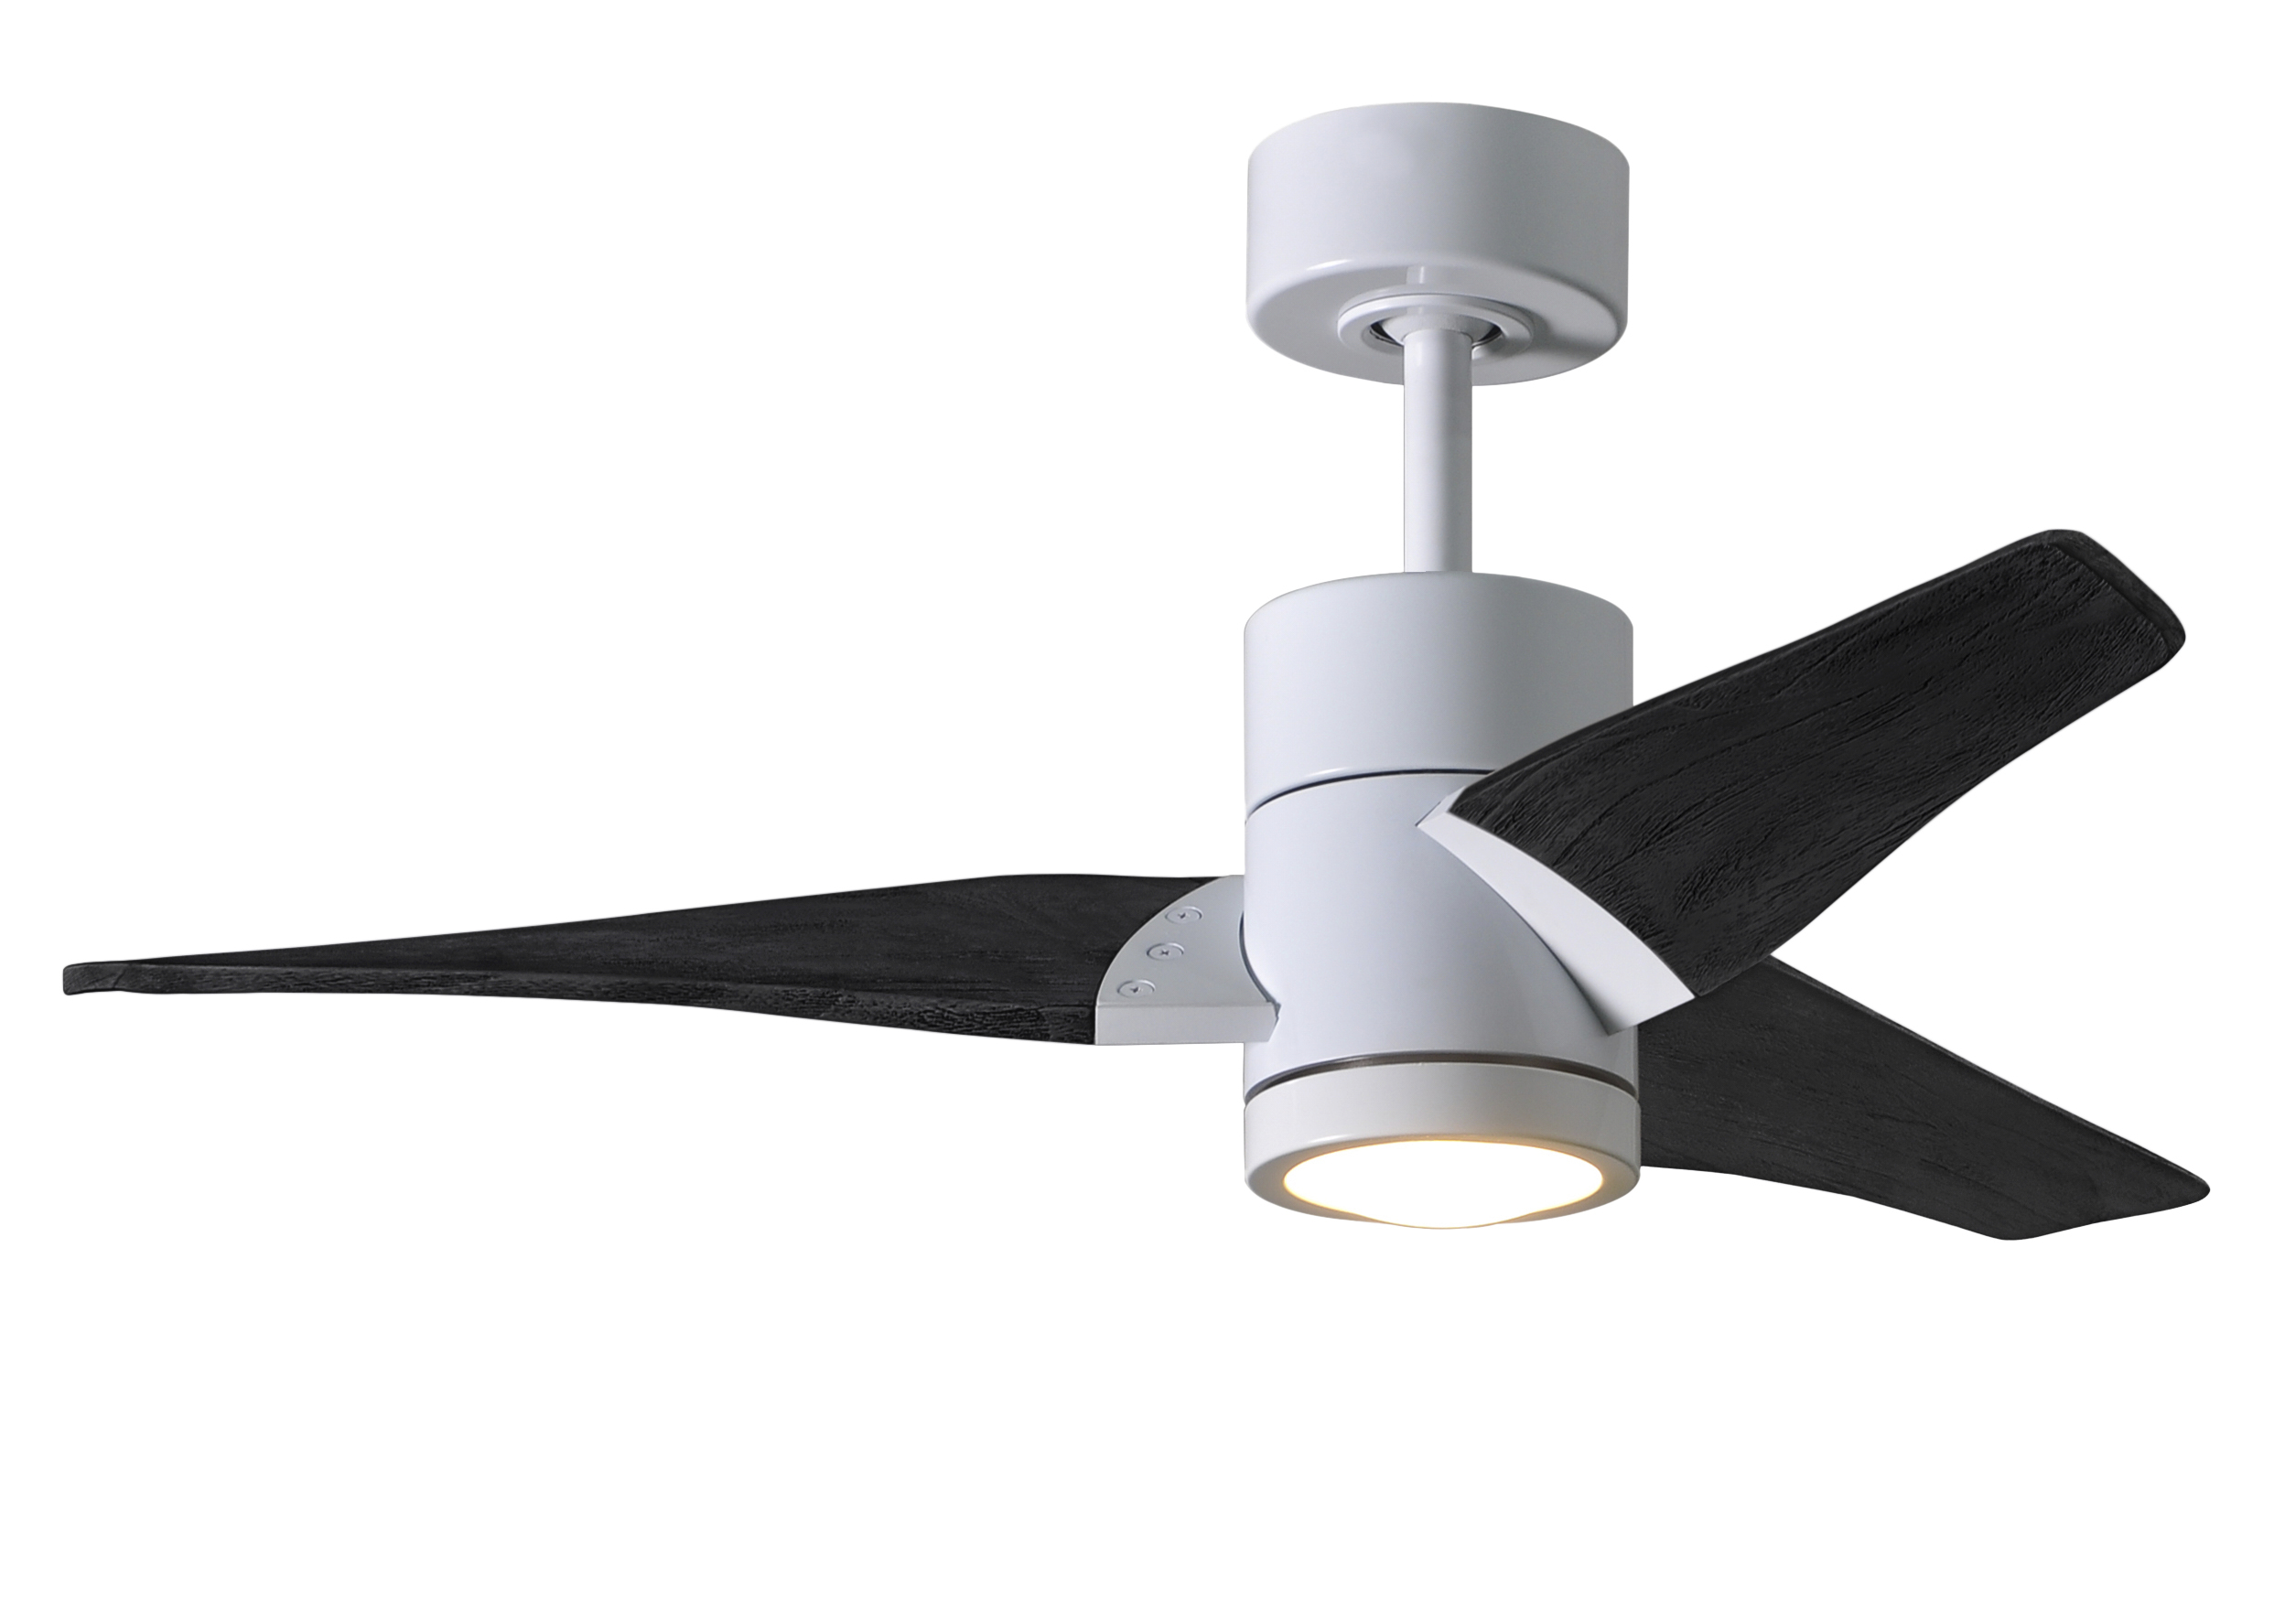 Super Janet Ceiling Fan in Gloss White with 42” Matte Black Blades